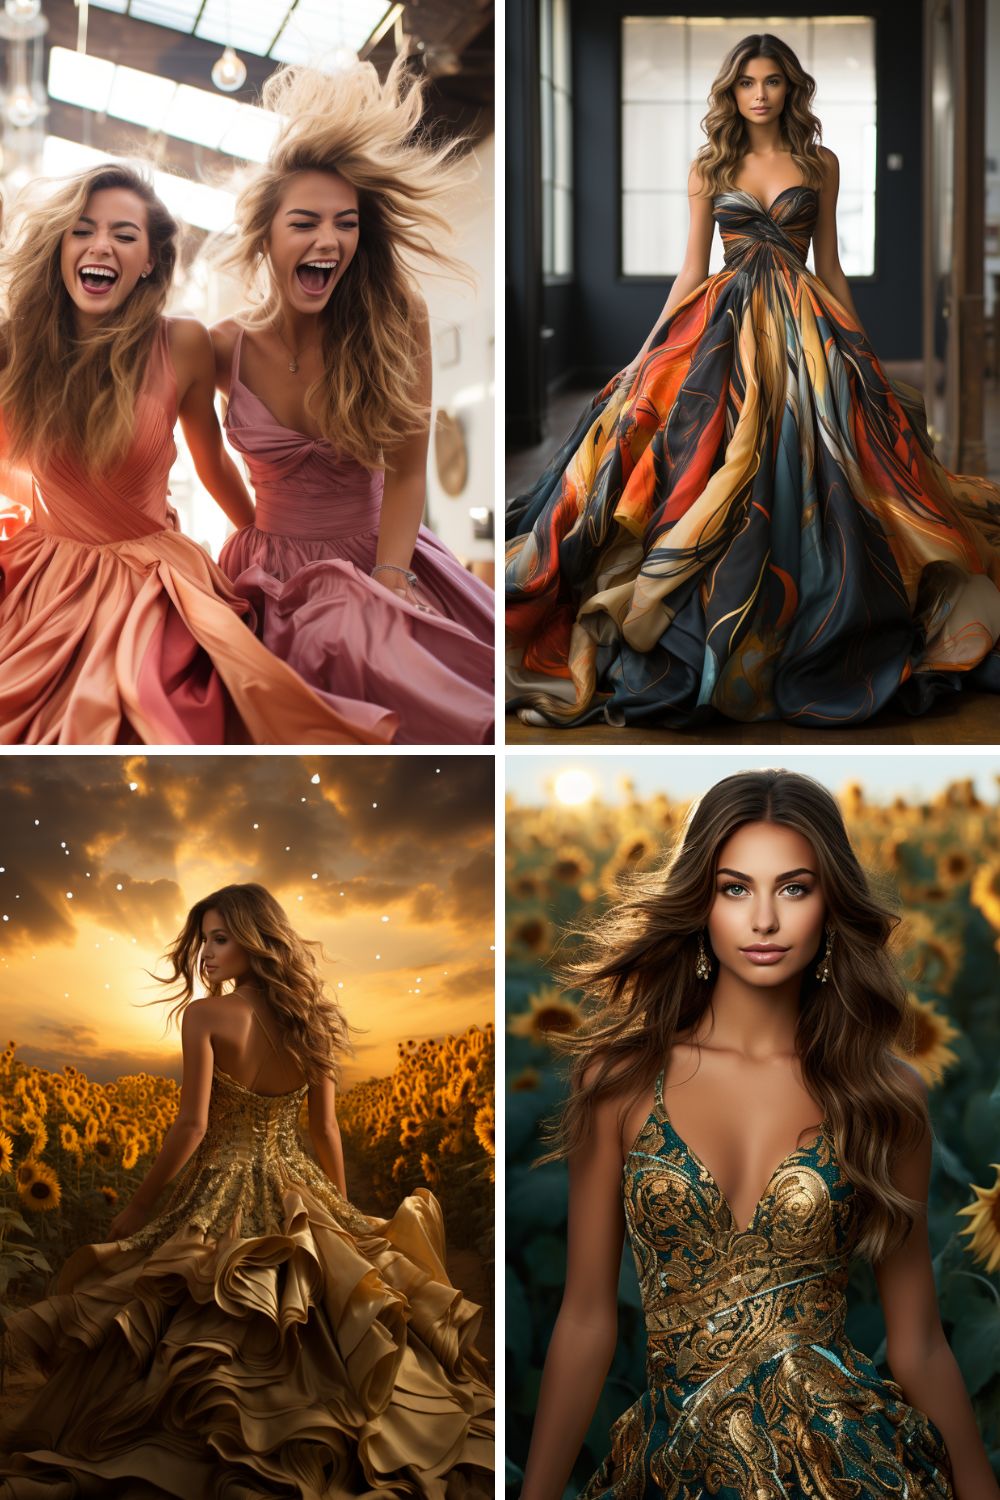 choosing radiant prom dresses and homecoming dresses that fit YOUR personality